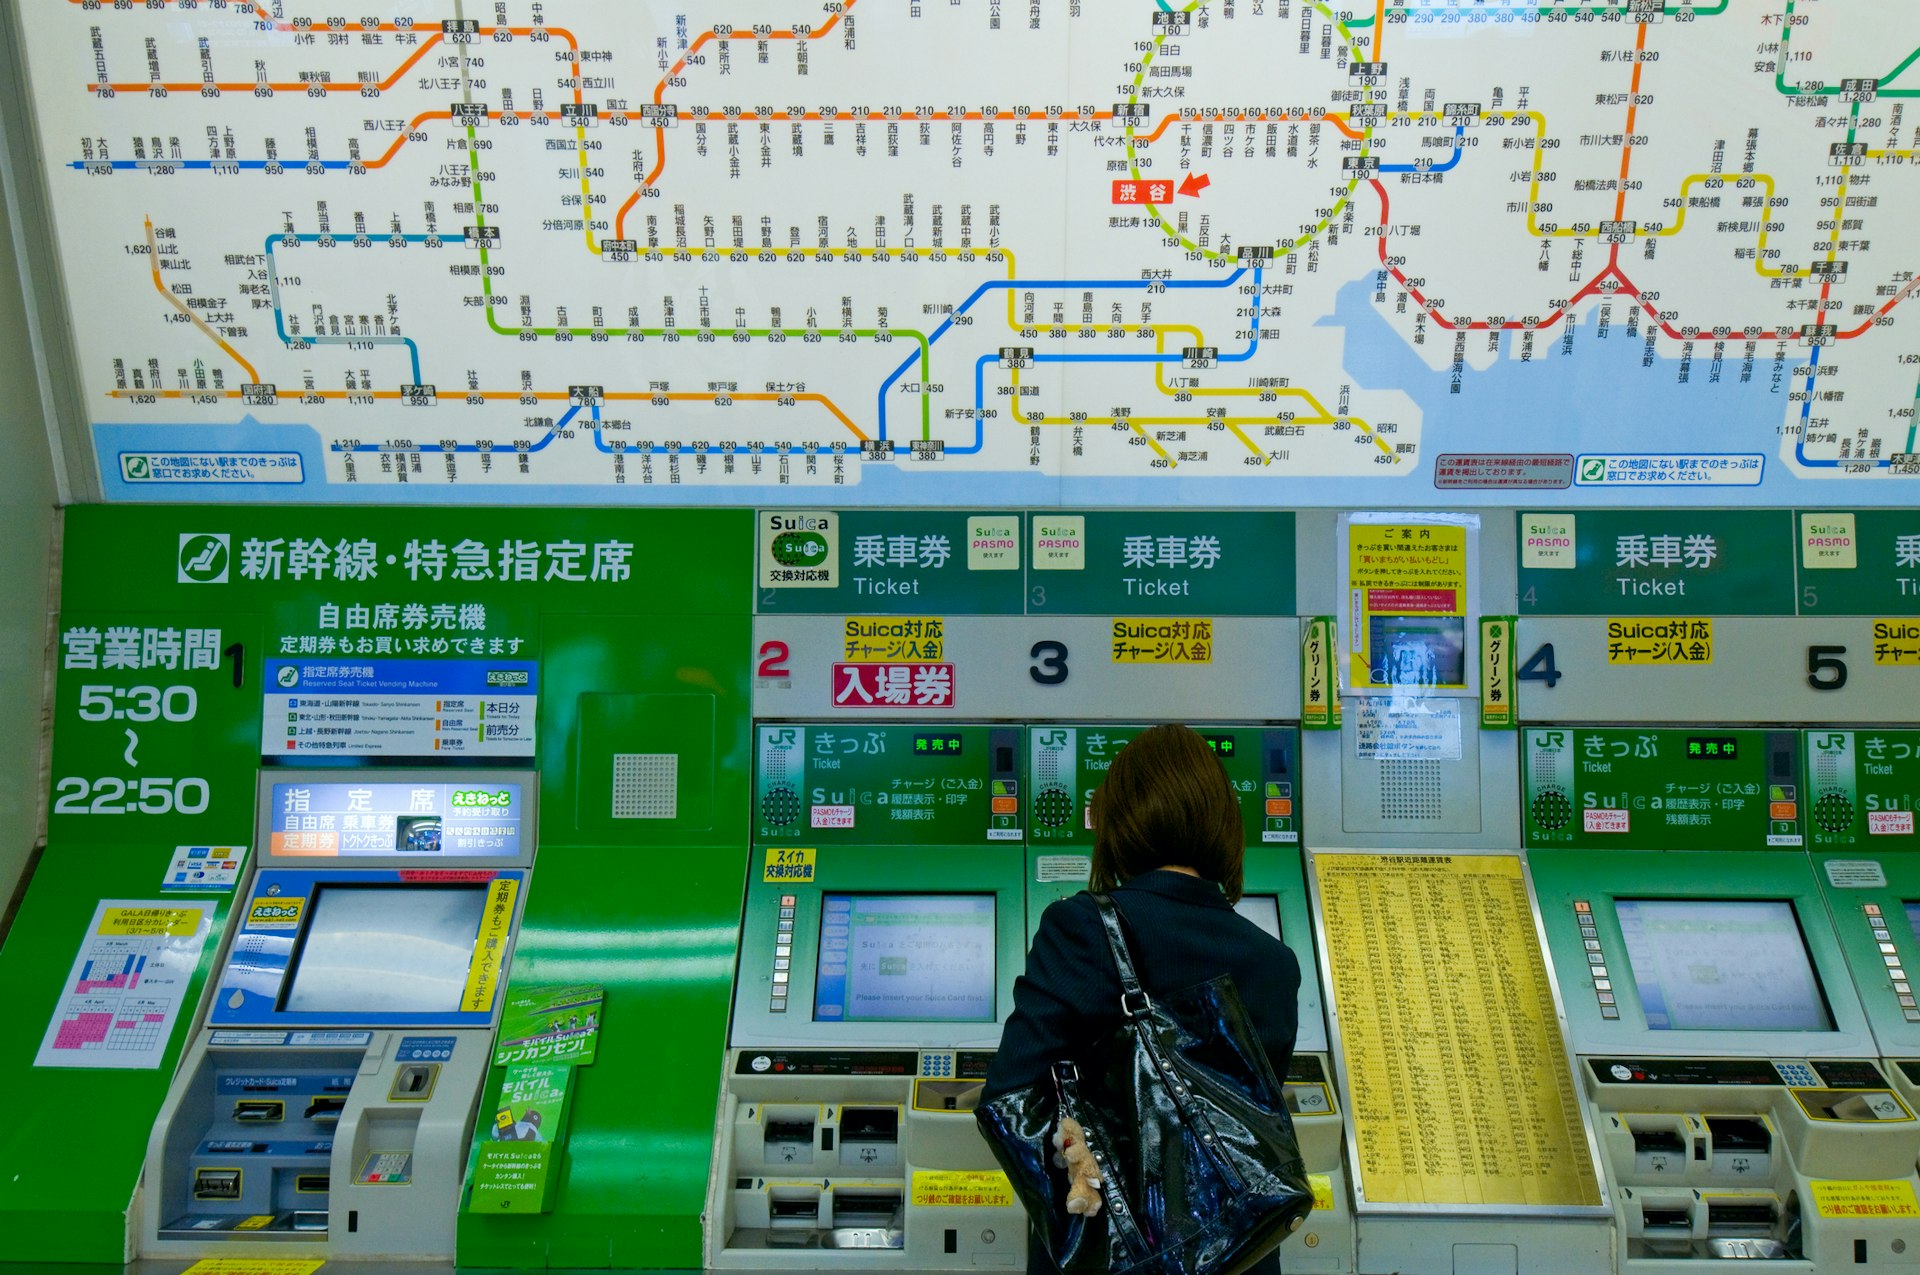 A woman stands at a bank of electronic ticket machines. Above her head is a color-coded map showing train lines